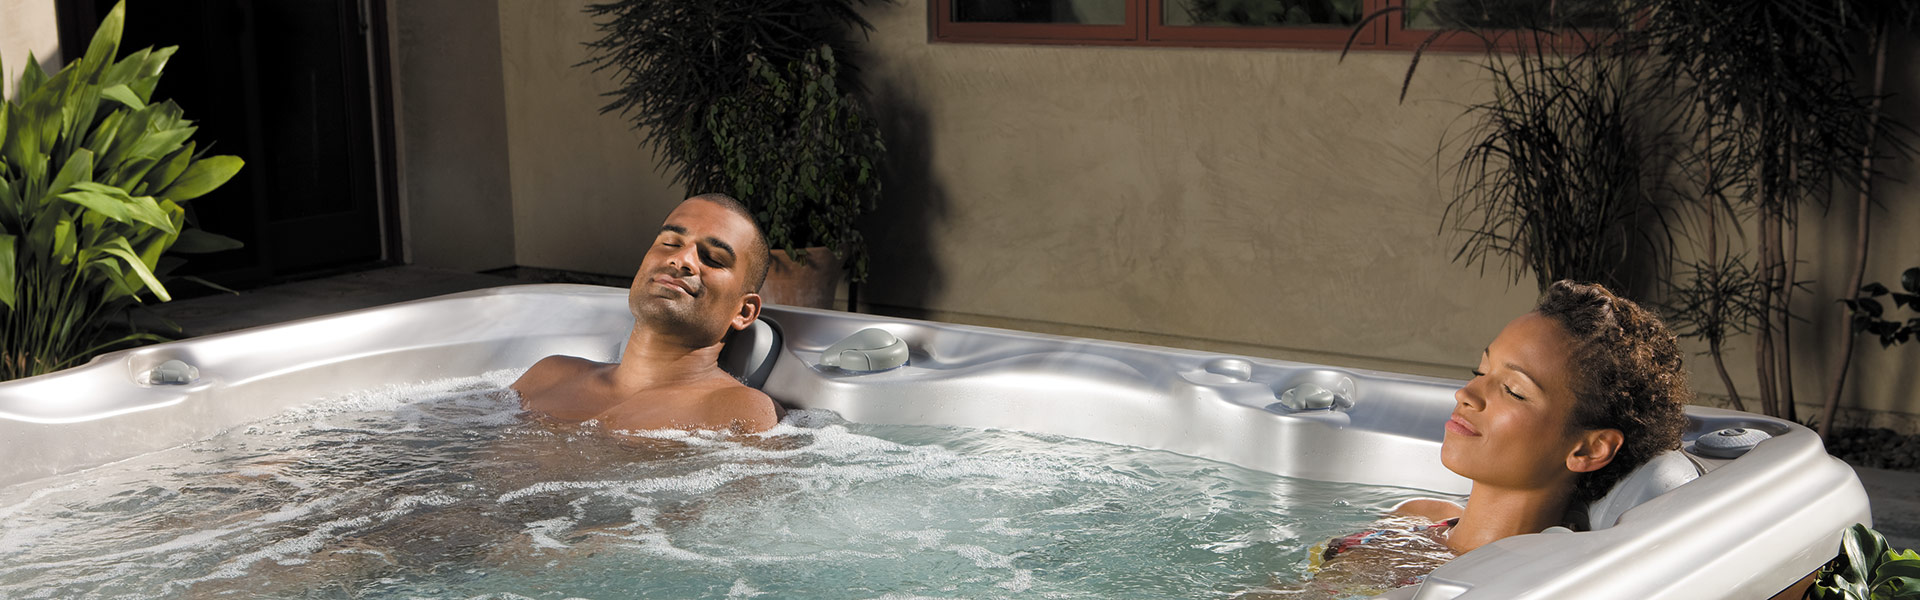 Why Buying a Spa Can Help You Be Healthier!